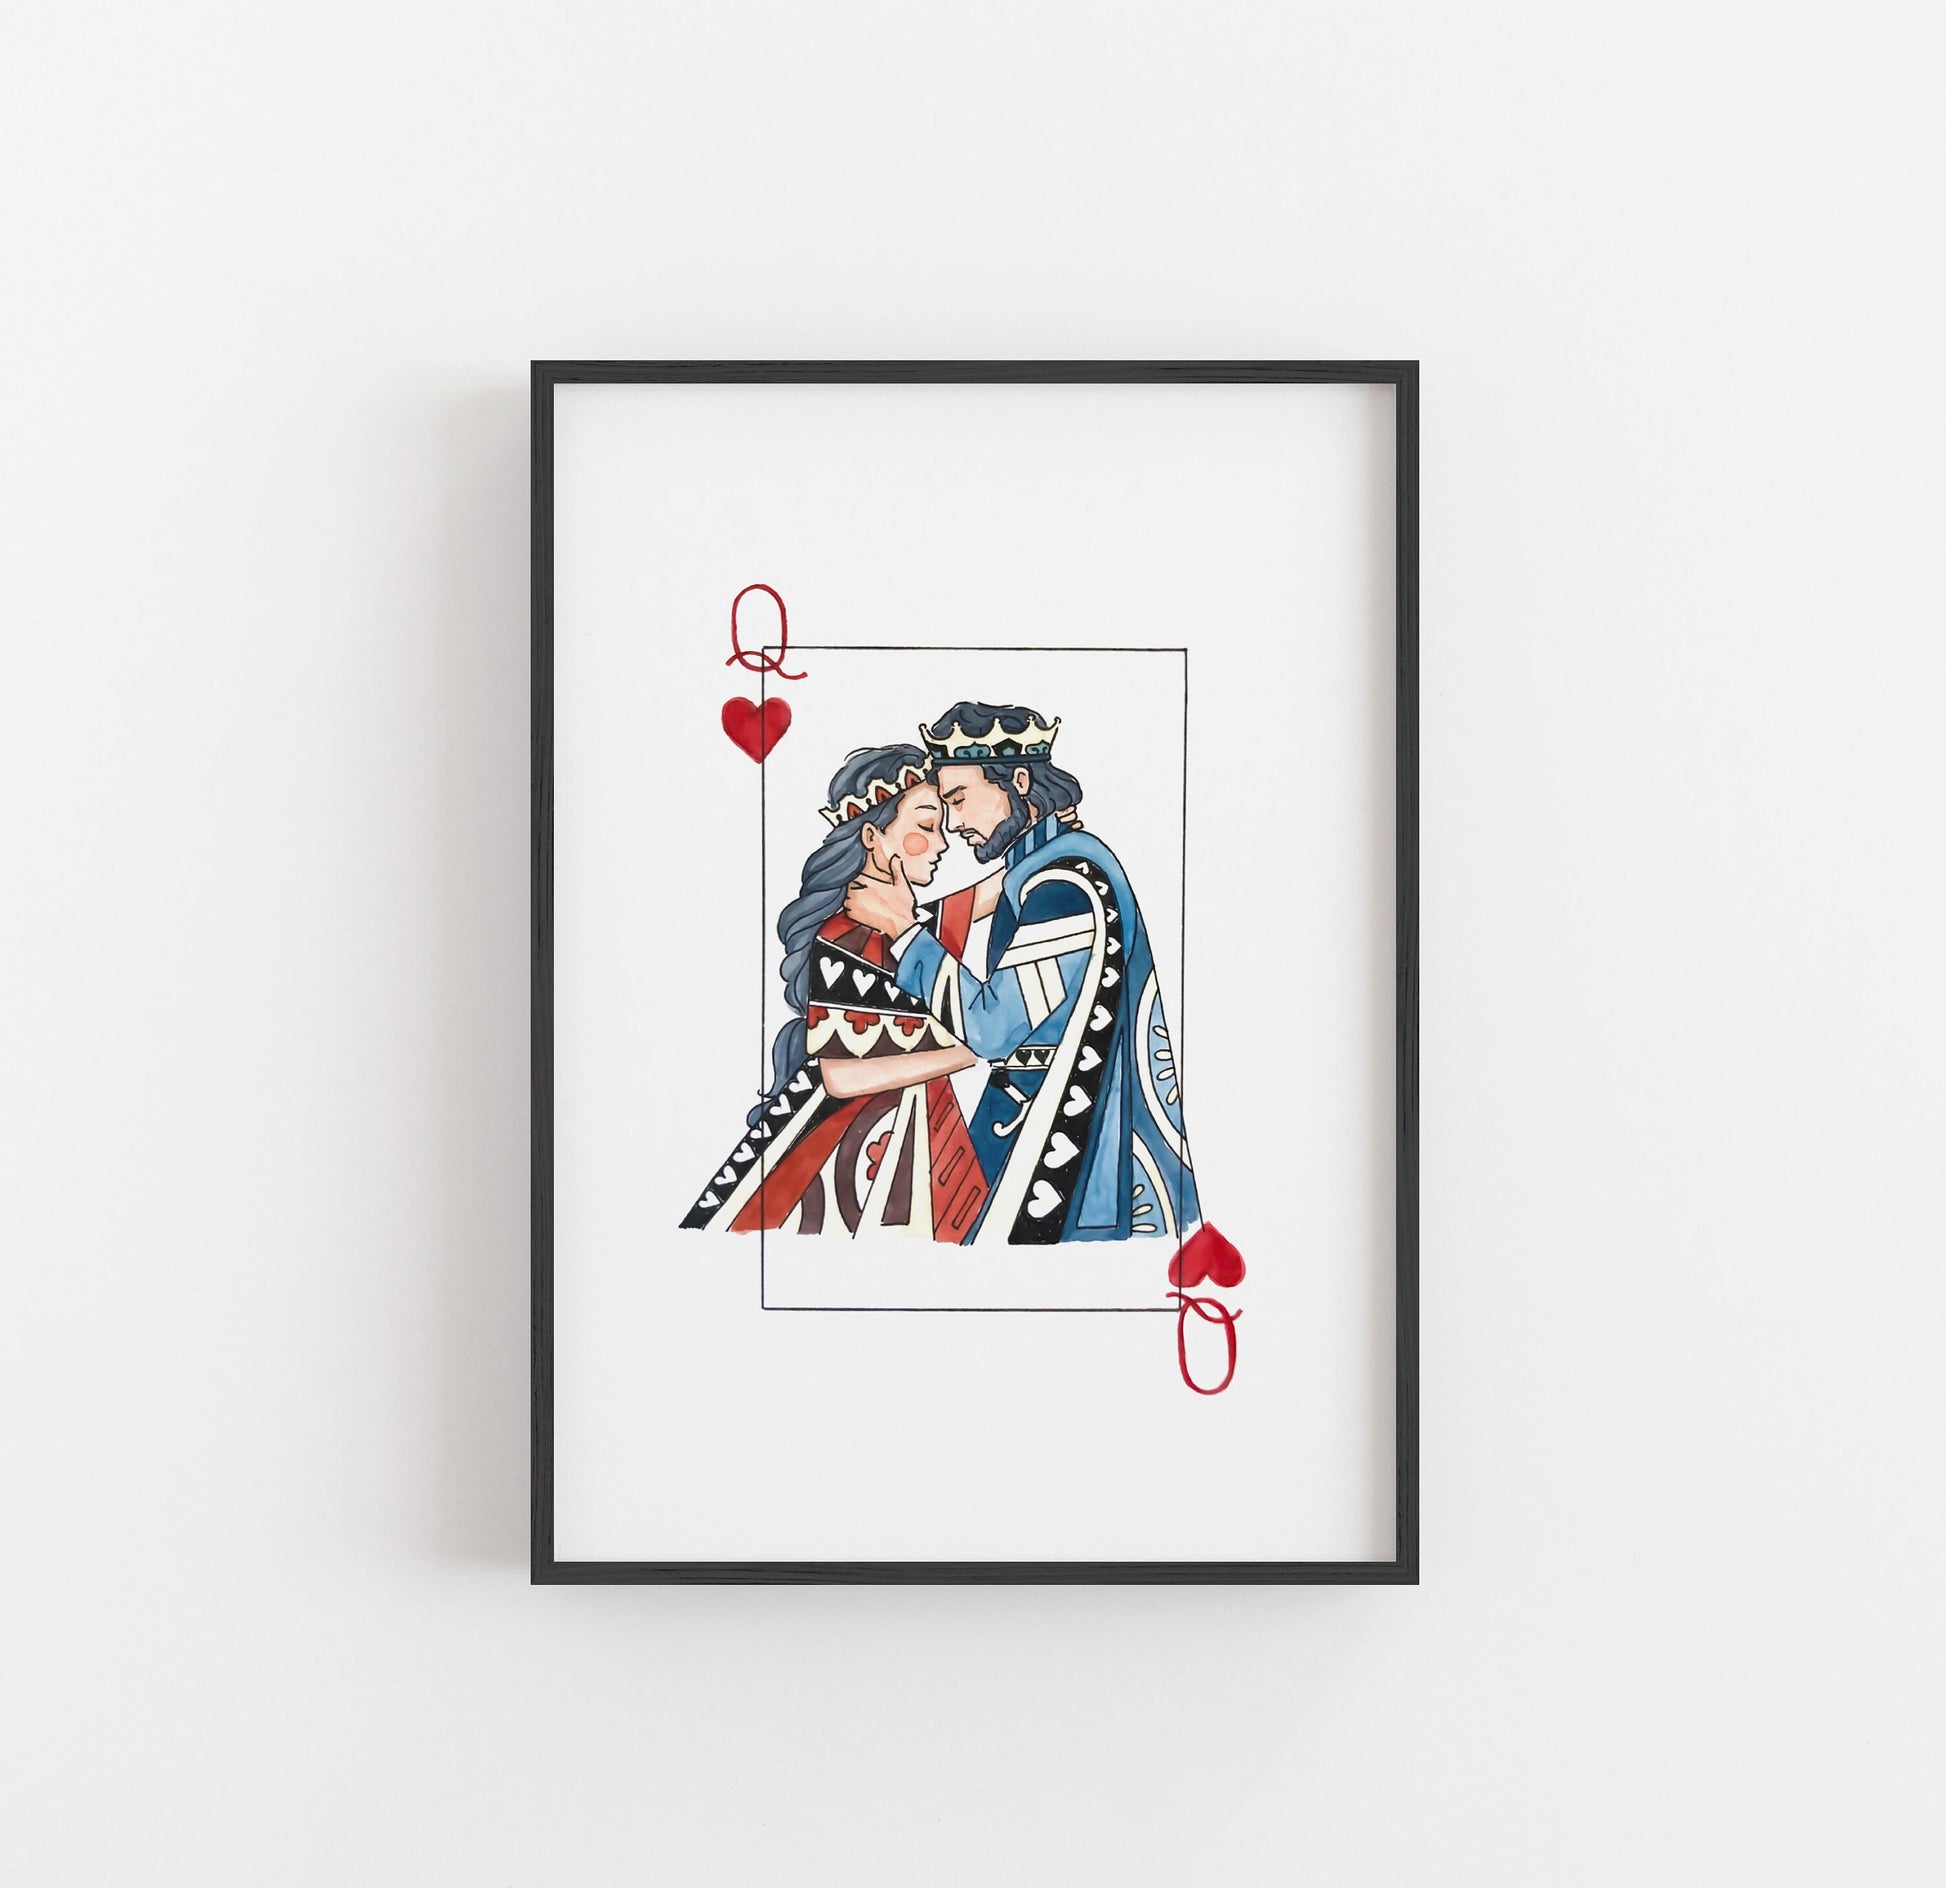 King and Queen Wall Art | Watercolor Illustration | 8x10" 5x7" Art Print | Valentines Gift | King & Queen Playing Cards | Wedding Gift